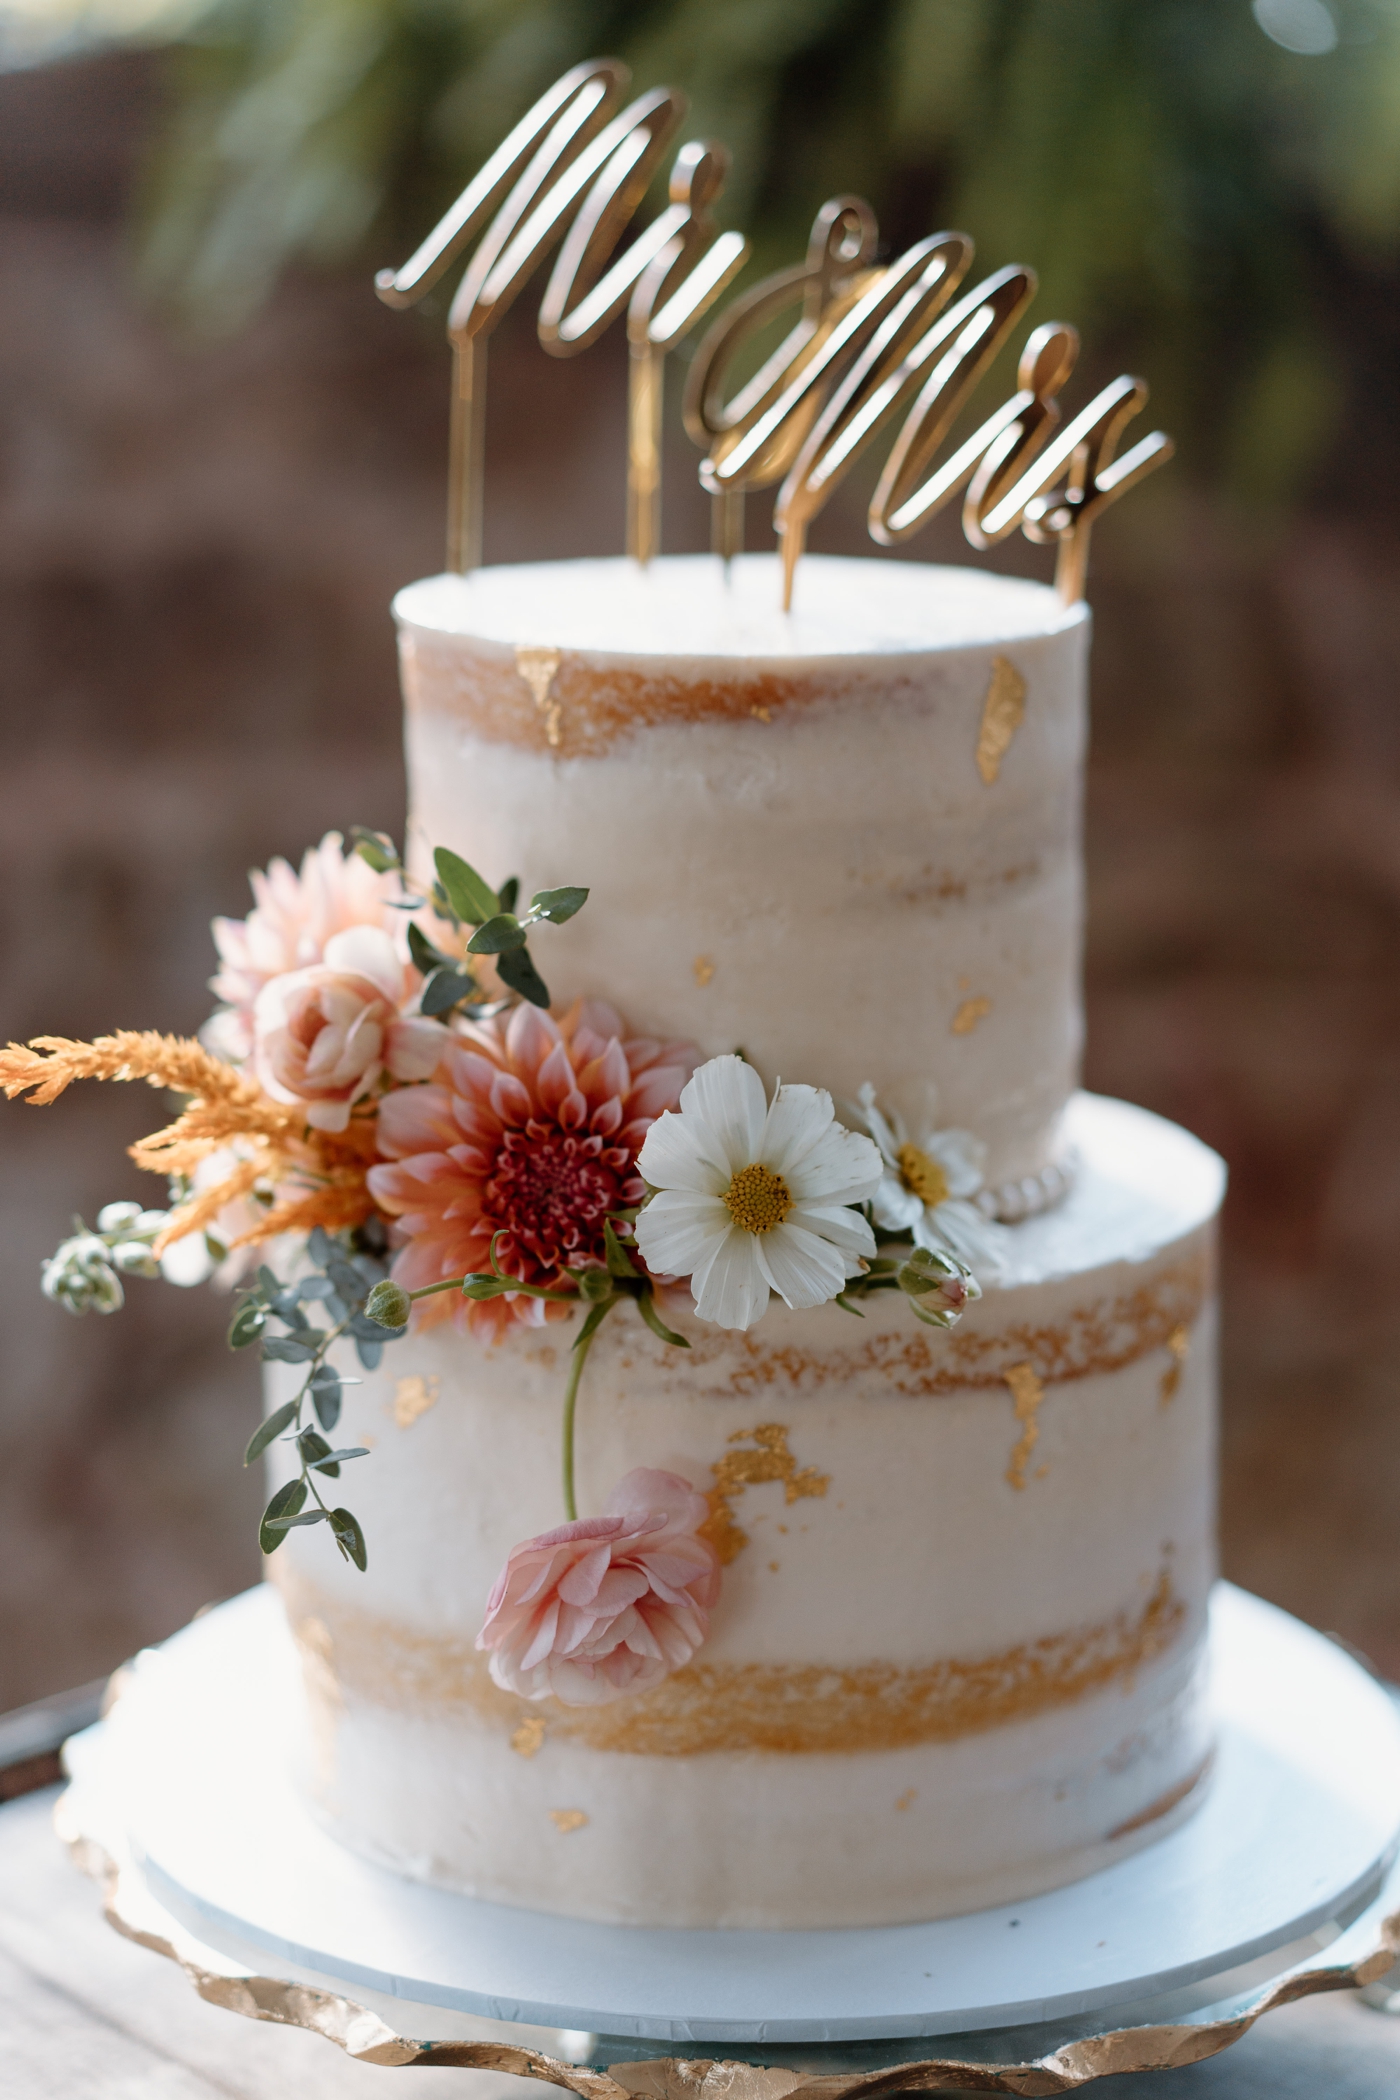 Naked wedding cake decorated with gold leaf and wildflowers